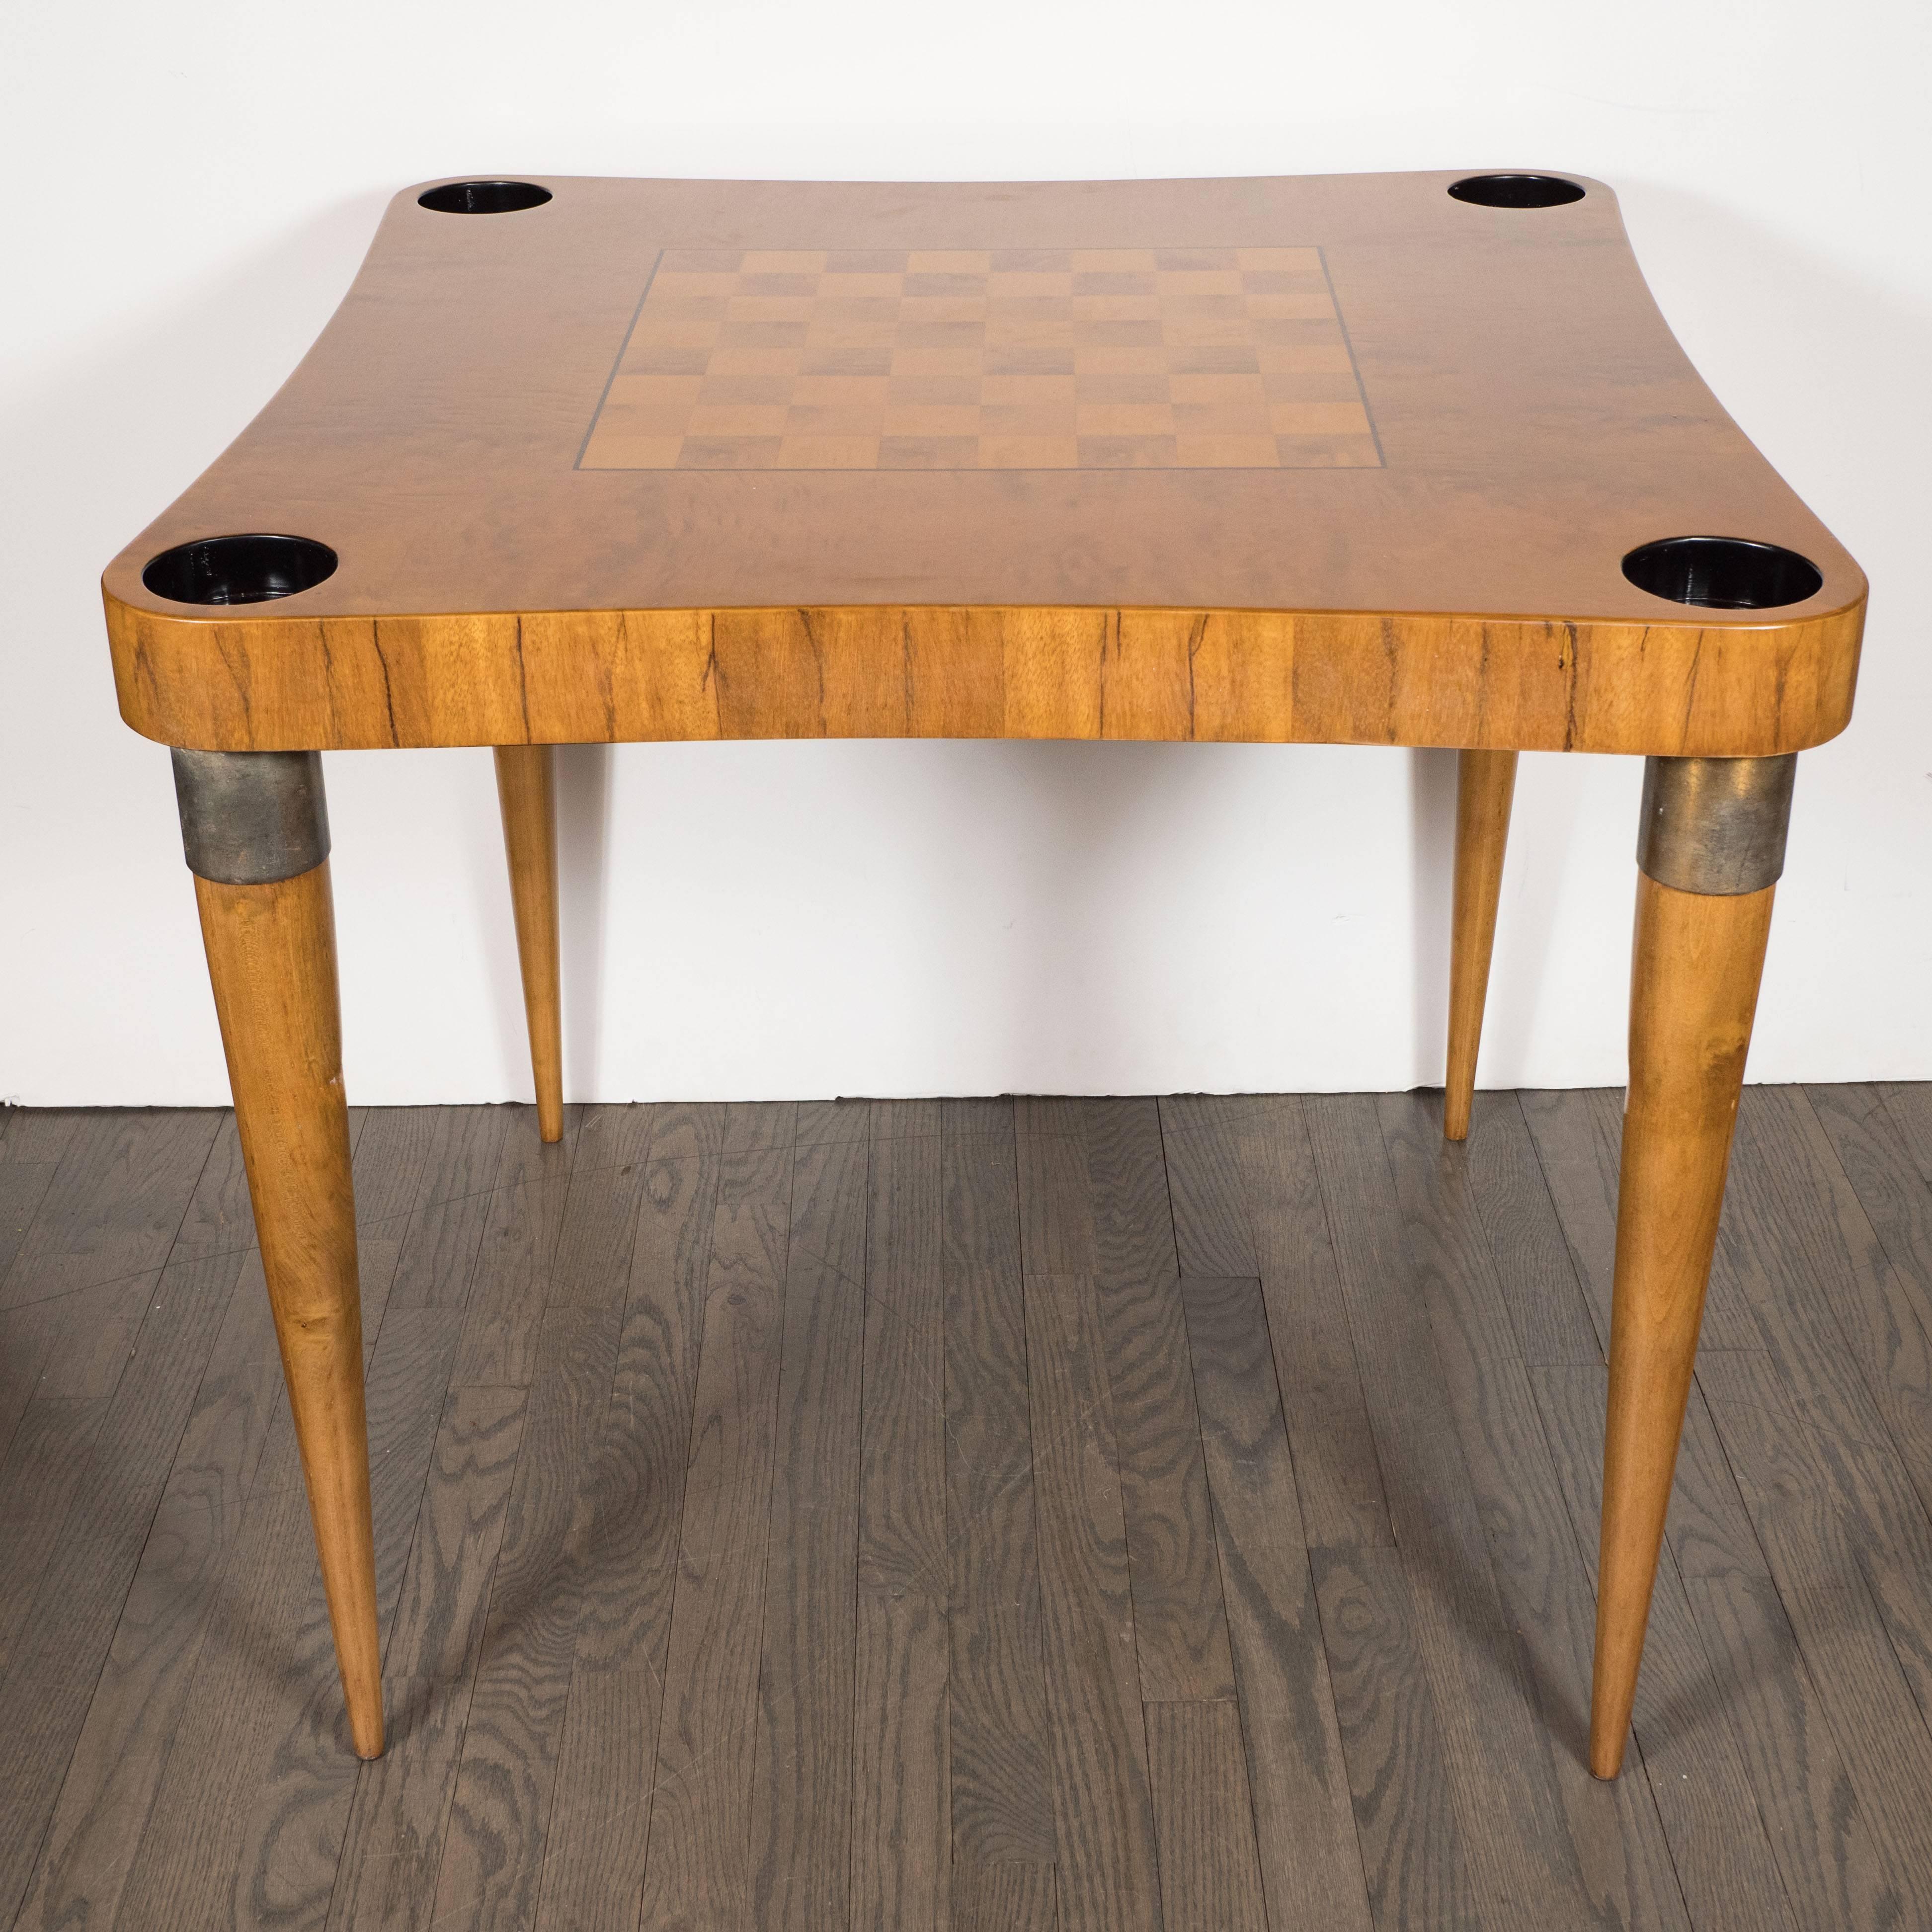 This elegant game table was realized by Gilbert Rohde- one of the most celebrated American designers of the 20th century- circa 1939. It features conical legs with antique brass wrapped details at their top; an inlaid chess board realized from white